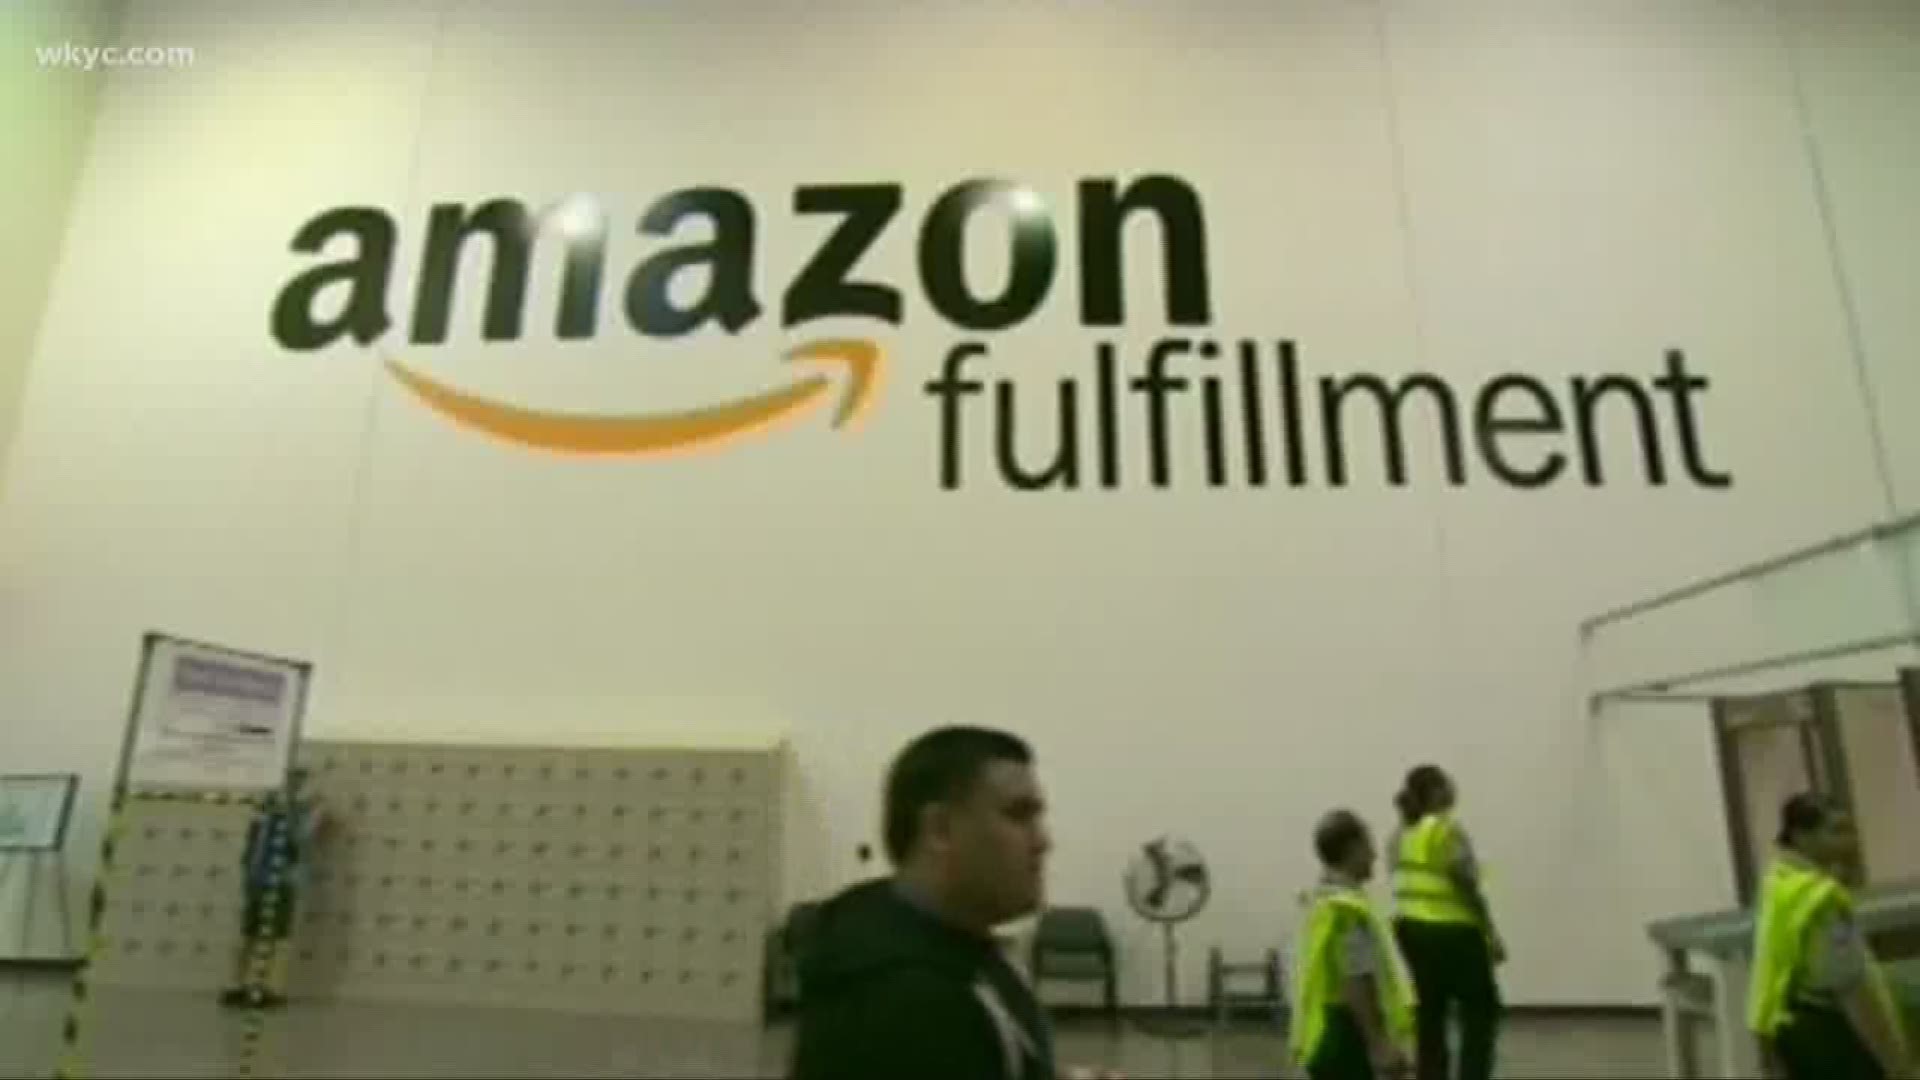 July 31, 2019: (AP) -- The state has signed off on tax incentives for two more Amazon distribution centers in Ohio. The Columbus Dispatch reports that the tax breaks could be worth up to $12.1 million based on how many jobs the internet retailer creates. The new centers in Akron and in Rossford near Toledo are expected to create 2,500 jobs.